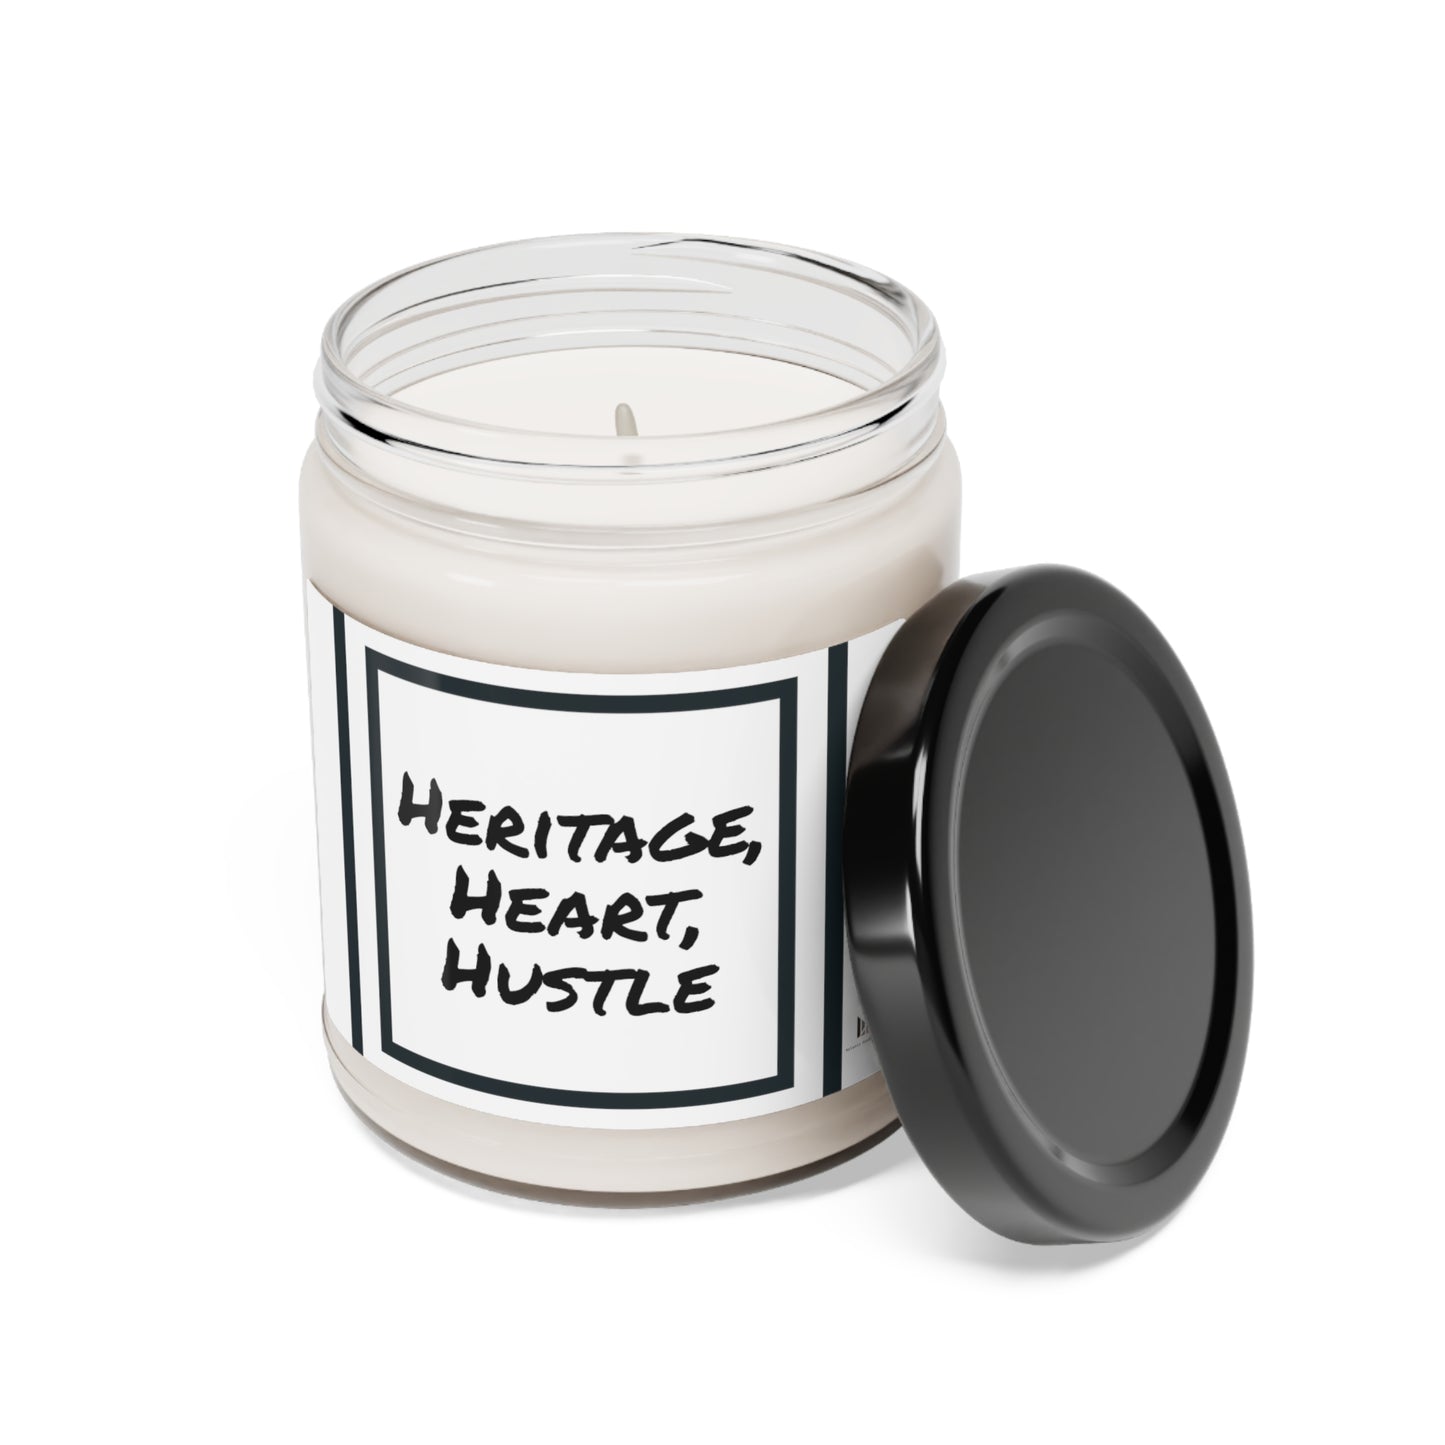 "Heritage" Scented Soy Candle, 9oz